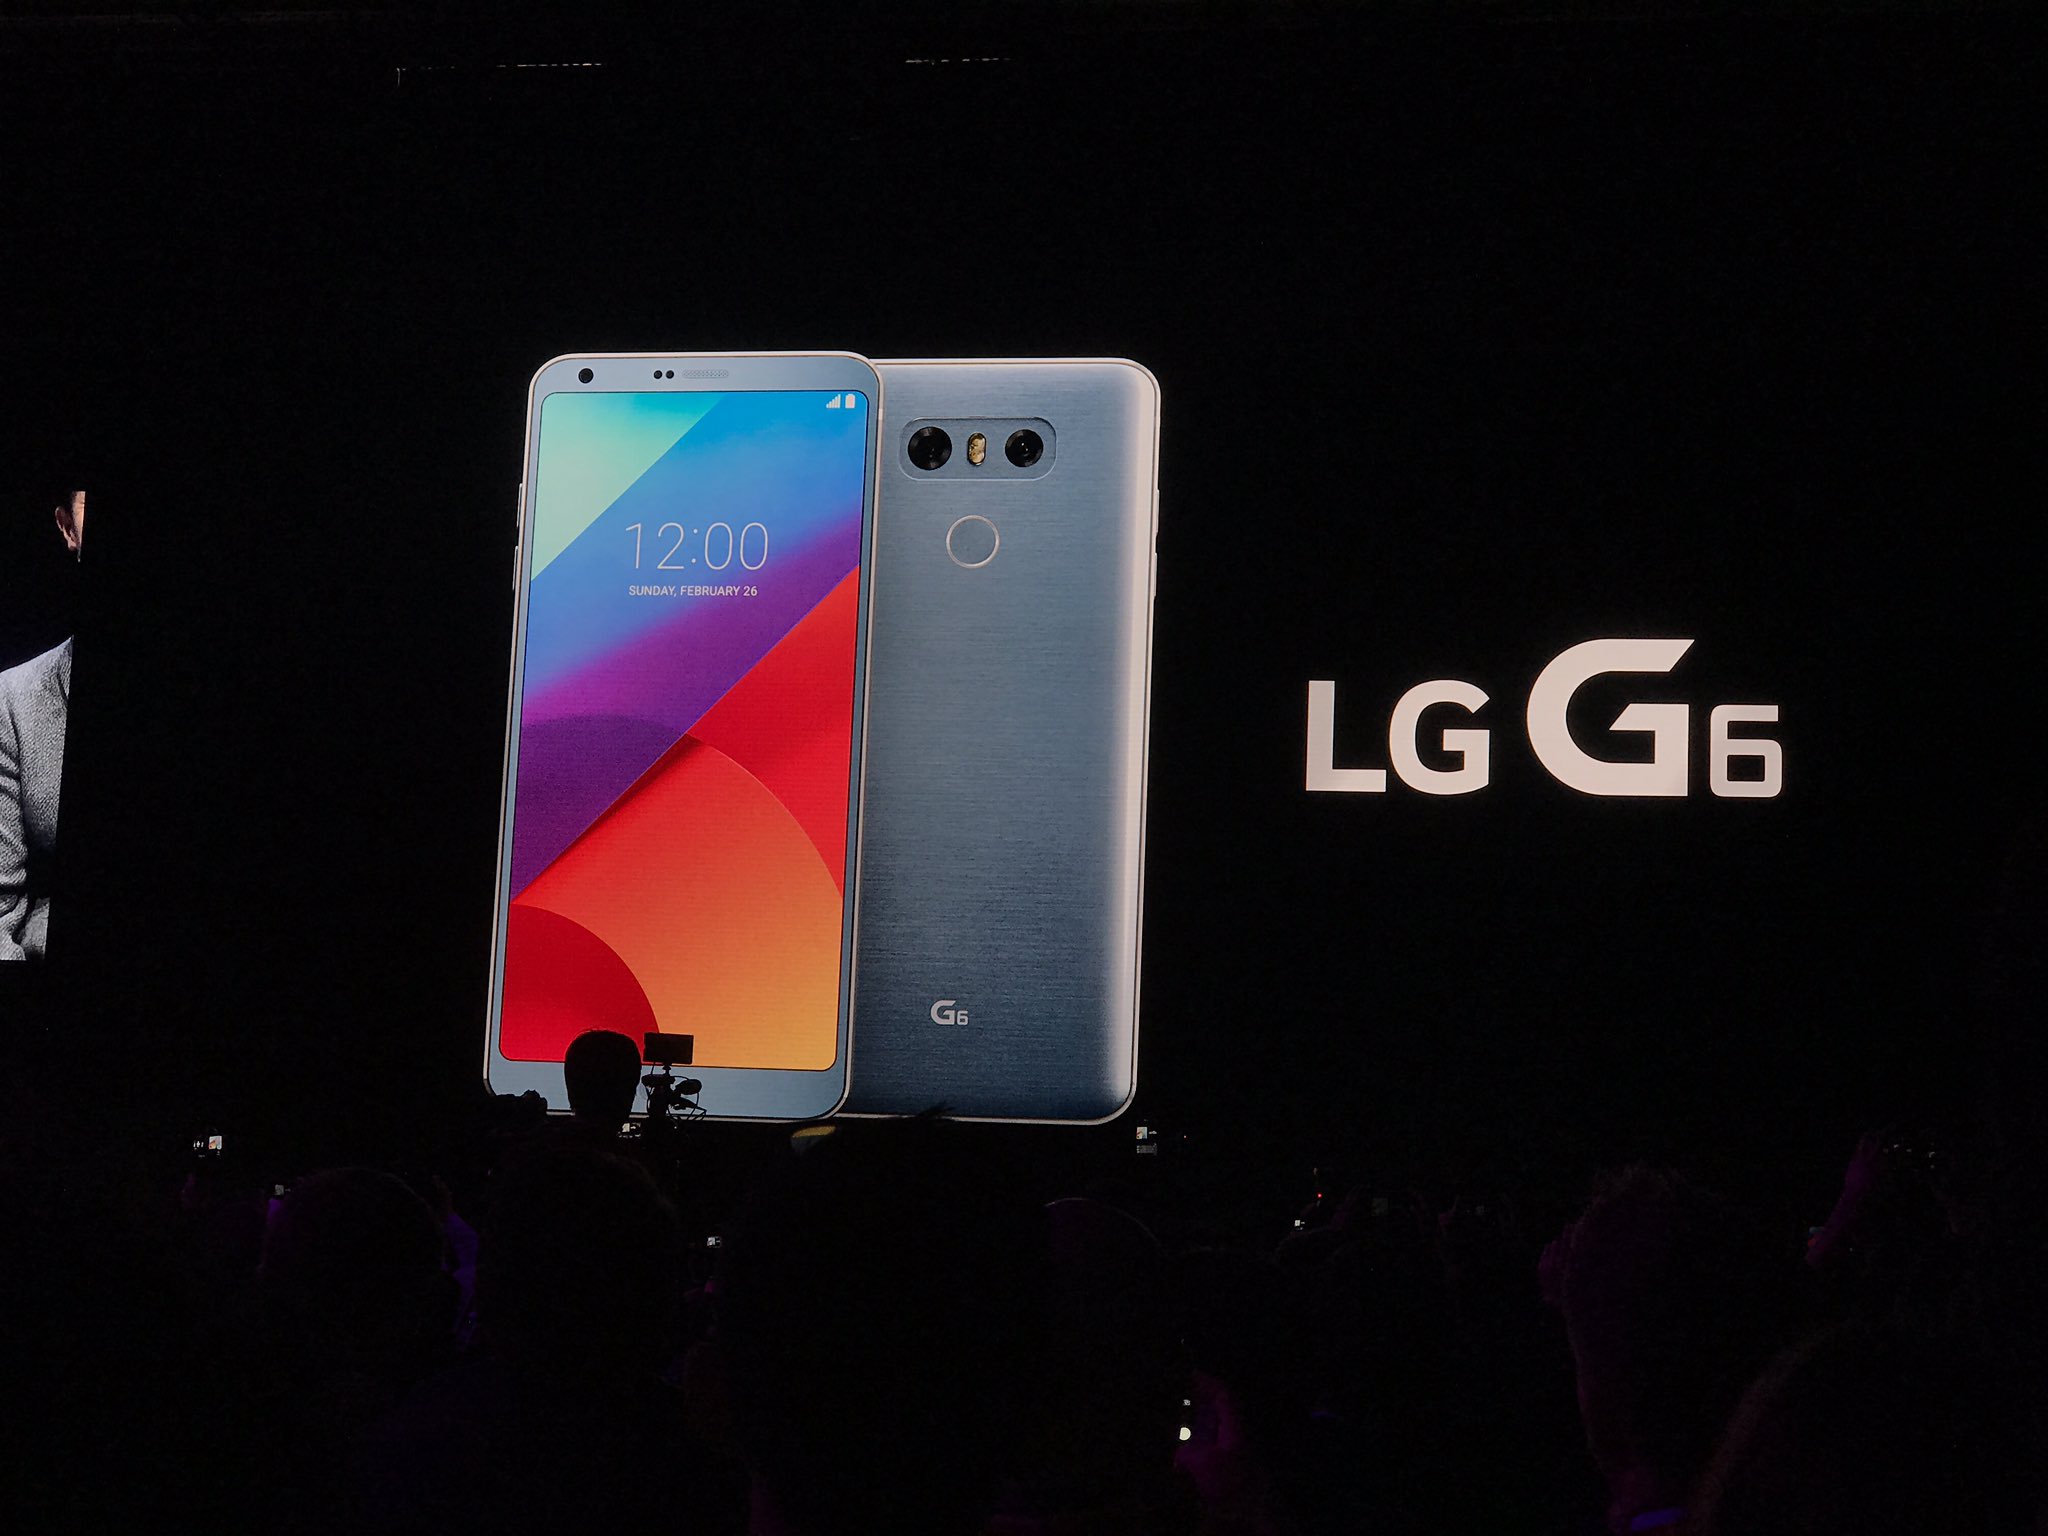 LG G6 Launches in MWC 2017